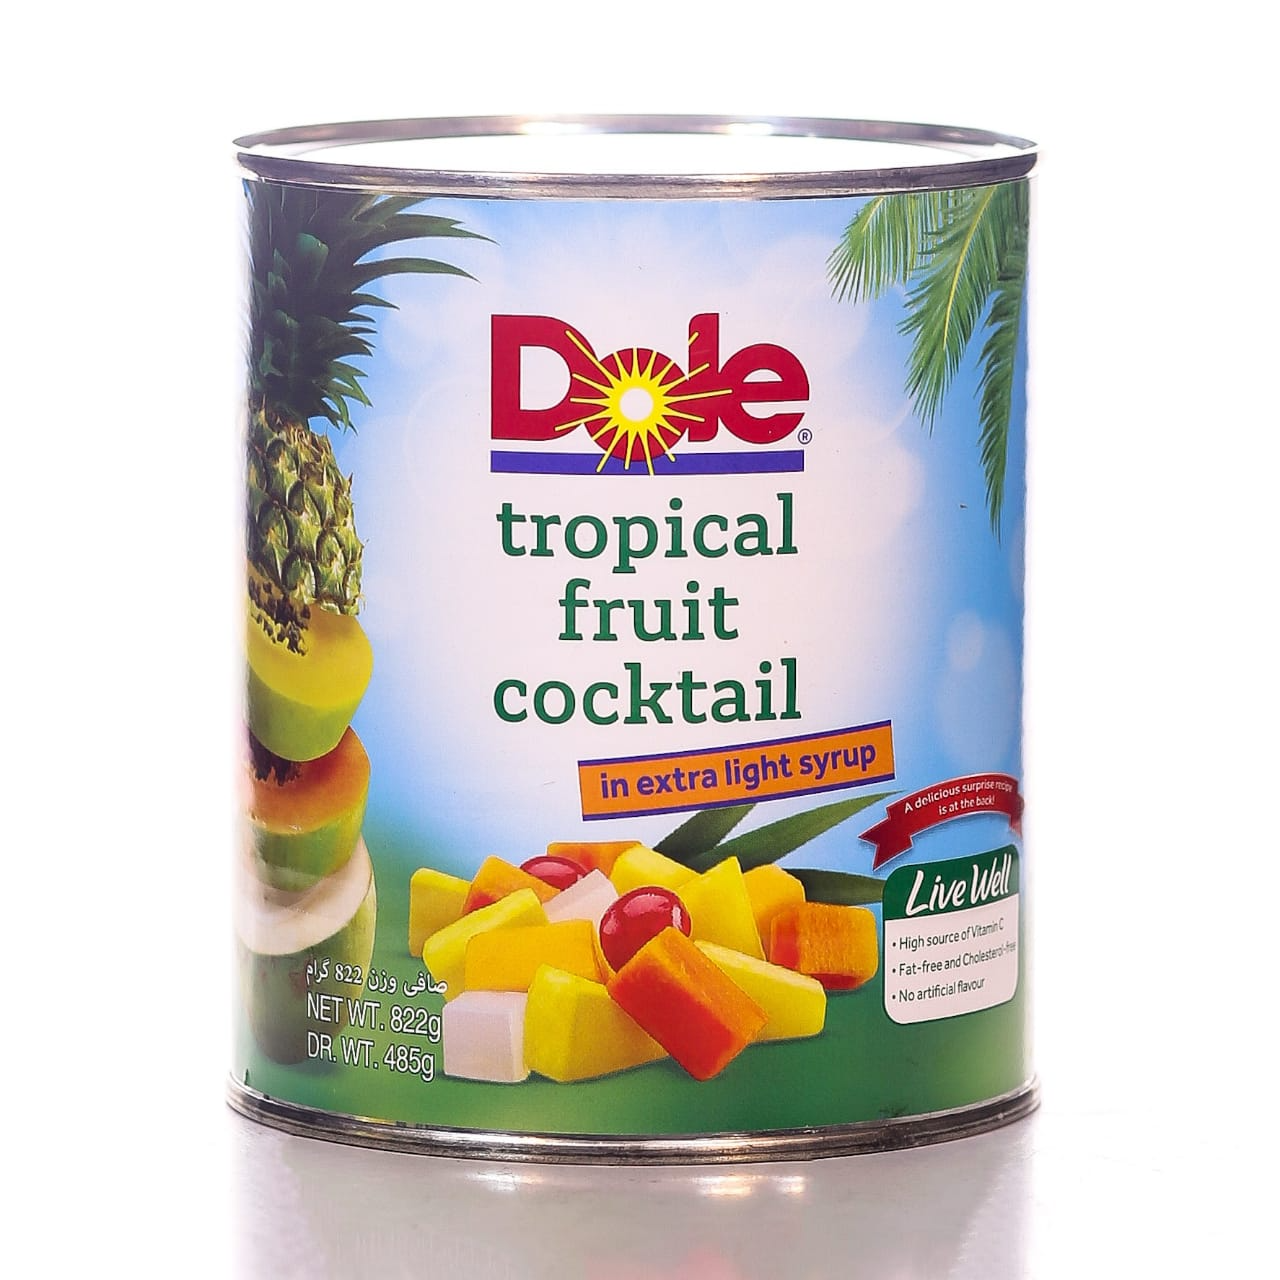 DOLE TROPICAL FRUIT COCKTAIL IN EXTRA LIGHT SYRUP 822 GM